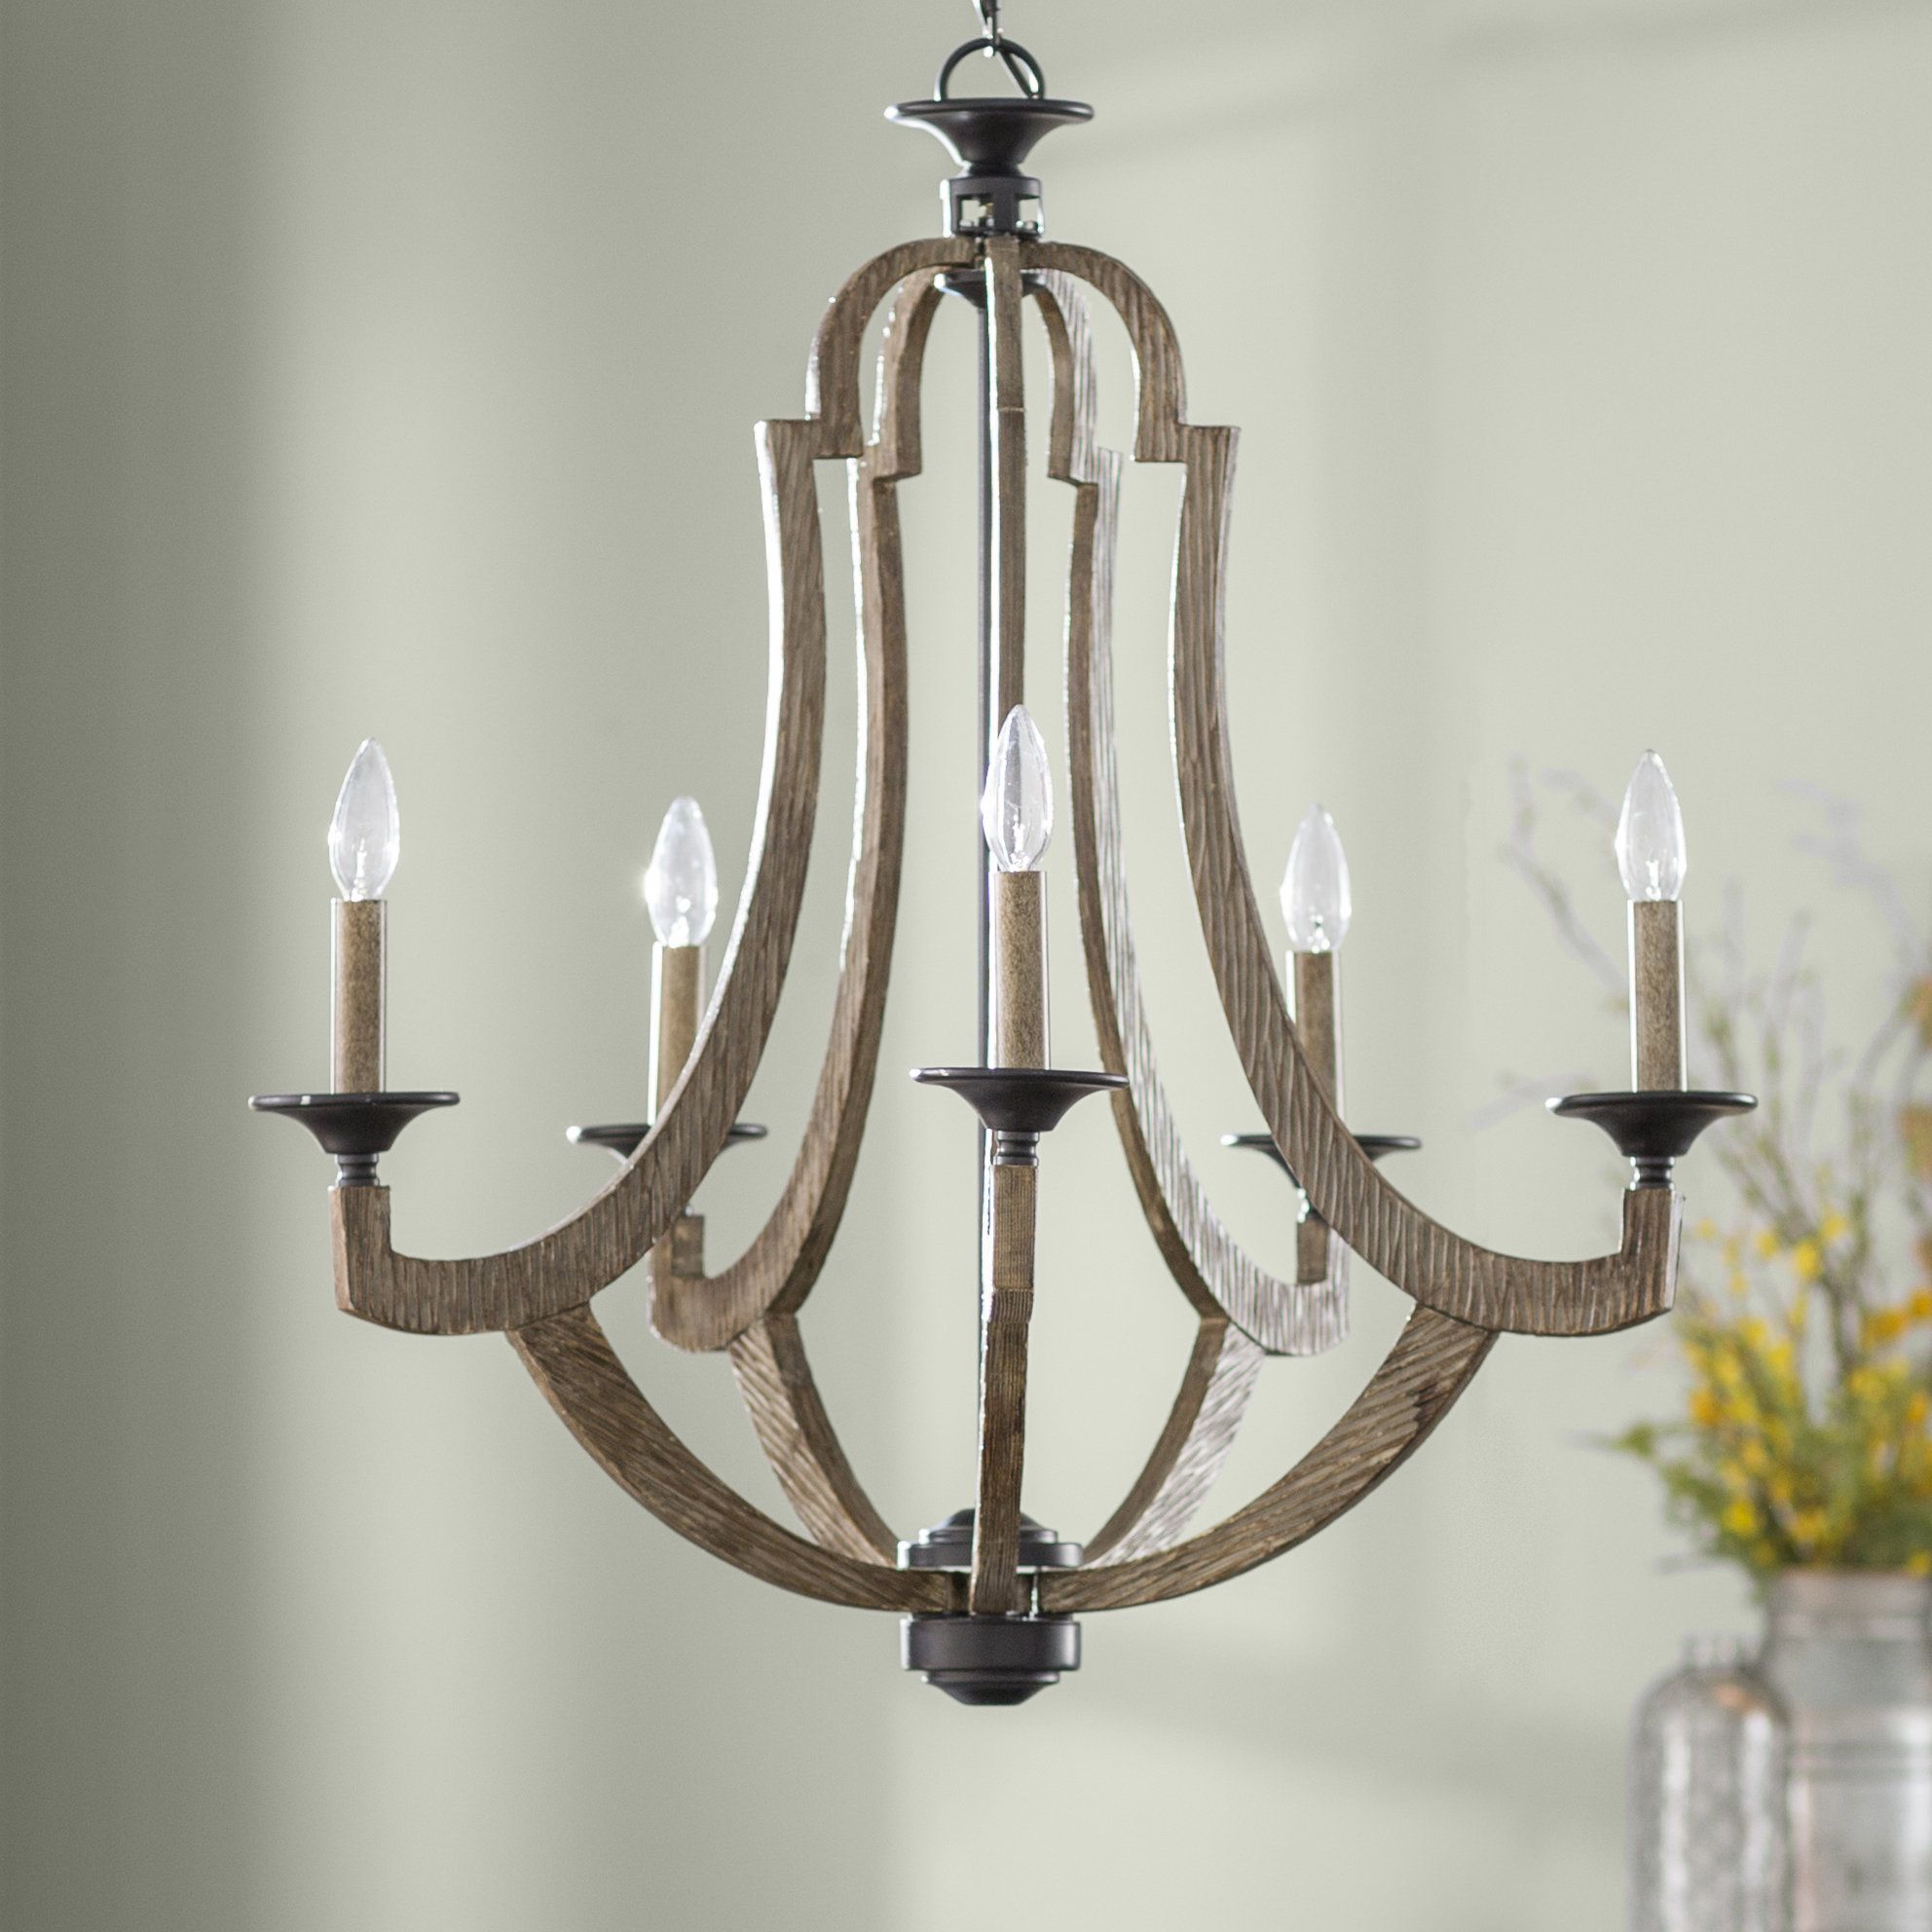 Laurel Foundry Modern Farmhouse Marcoux 5 Light Empire Chandelier Within Phifer 6 Light Empire Chandeliers (View 18 of 30)